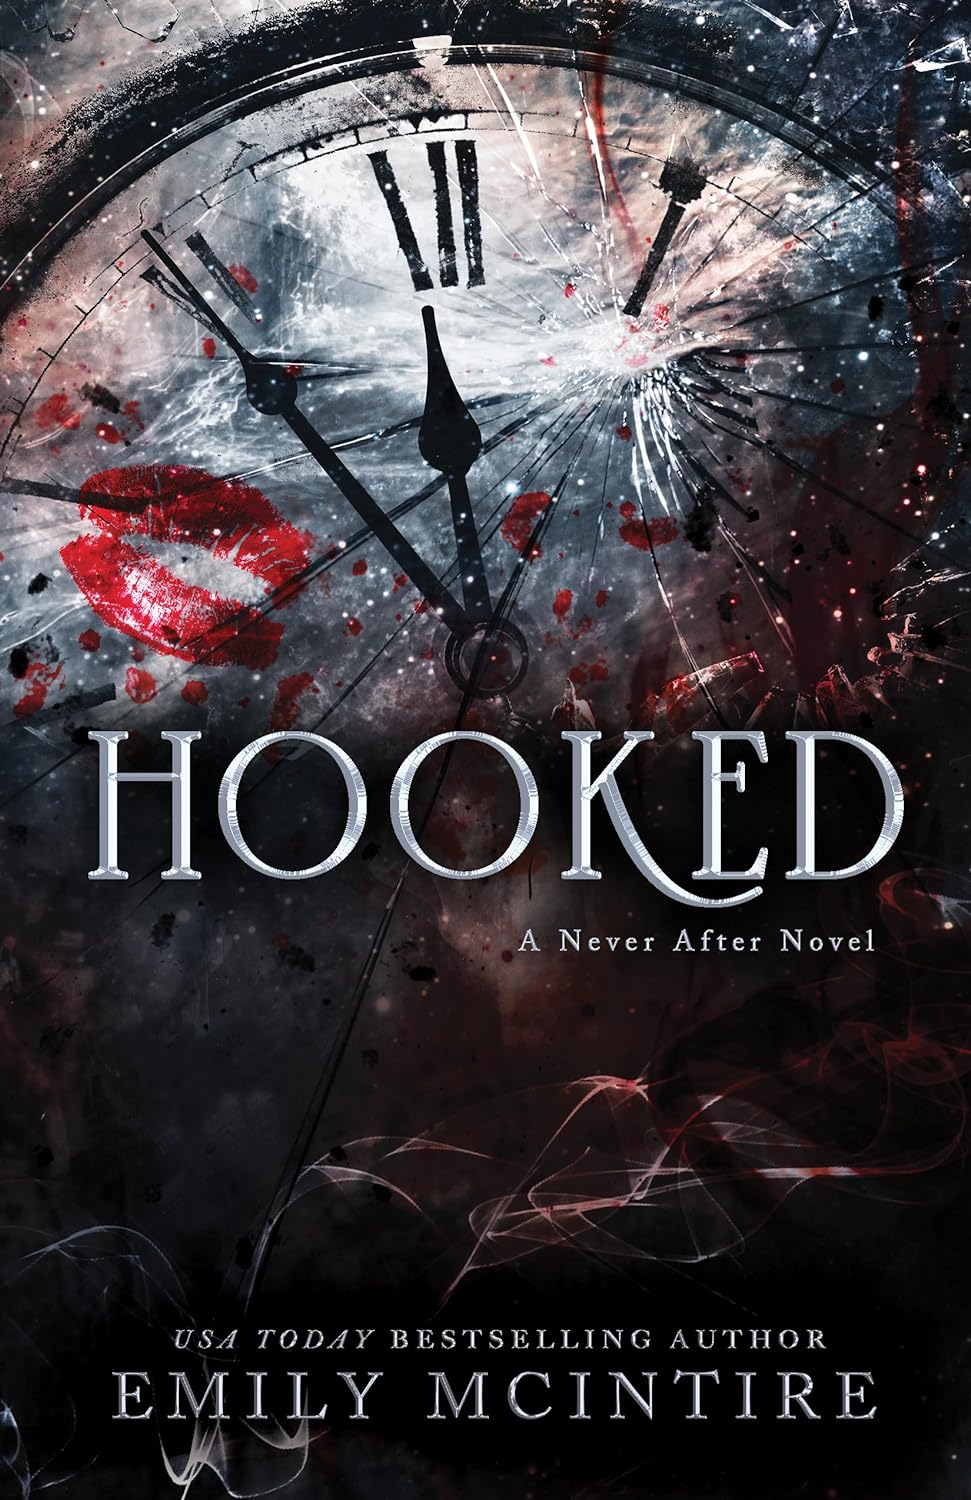 Cover for Hooked by Emily McIntire features a black cover with while letters and a clock in the upper background